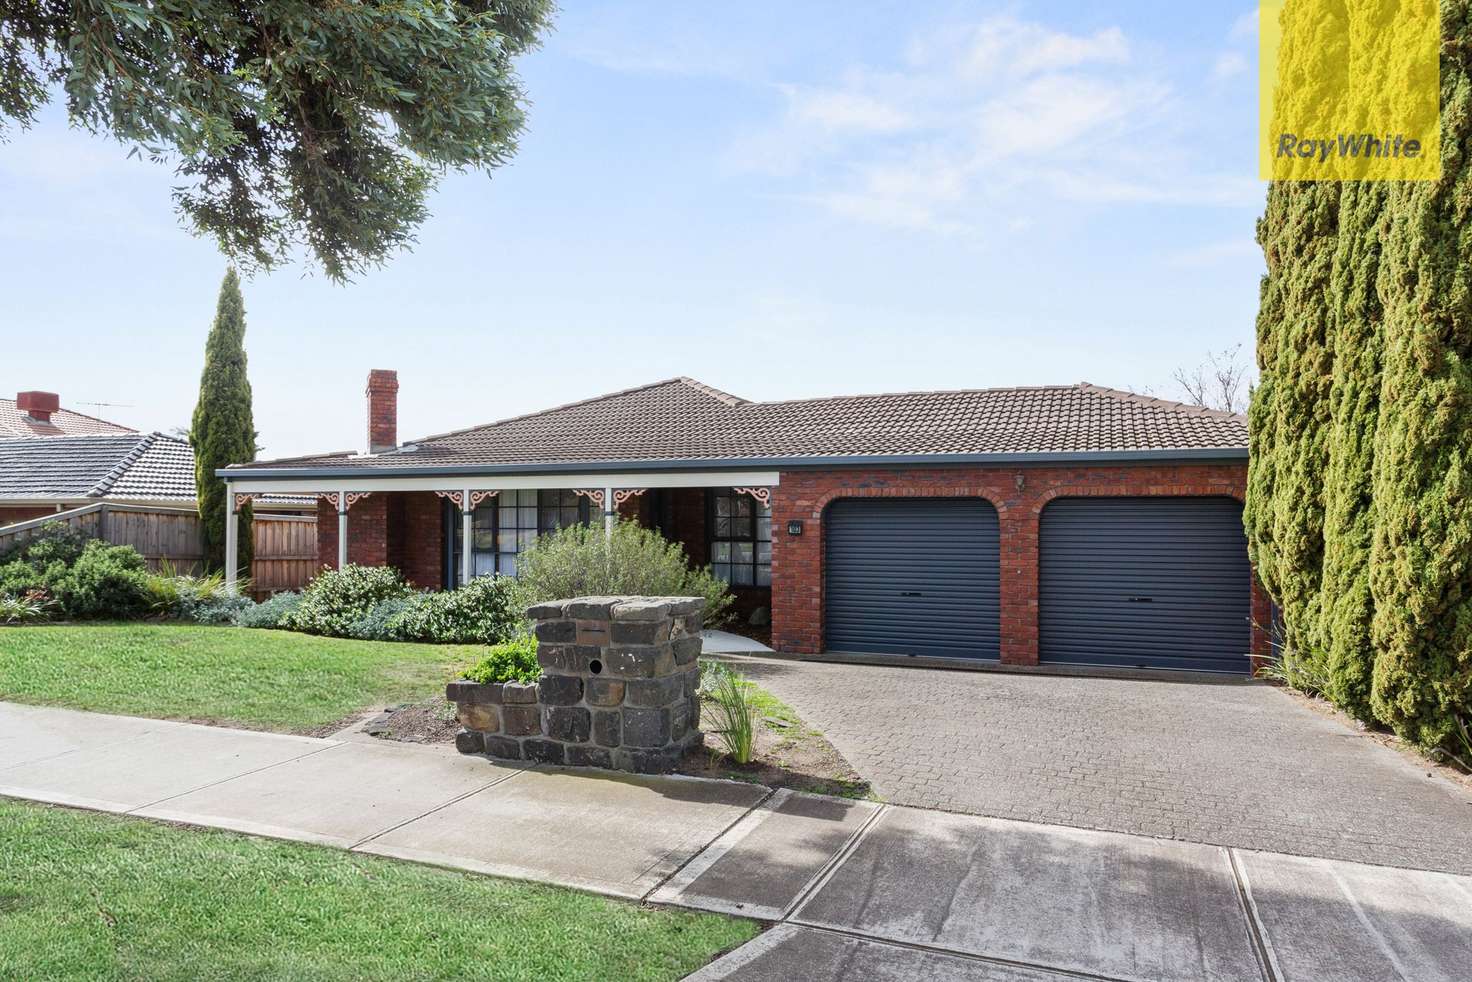 Main view of Homely house listing, 103 Burrowye Crescent, Keilor VIC 3036